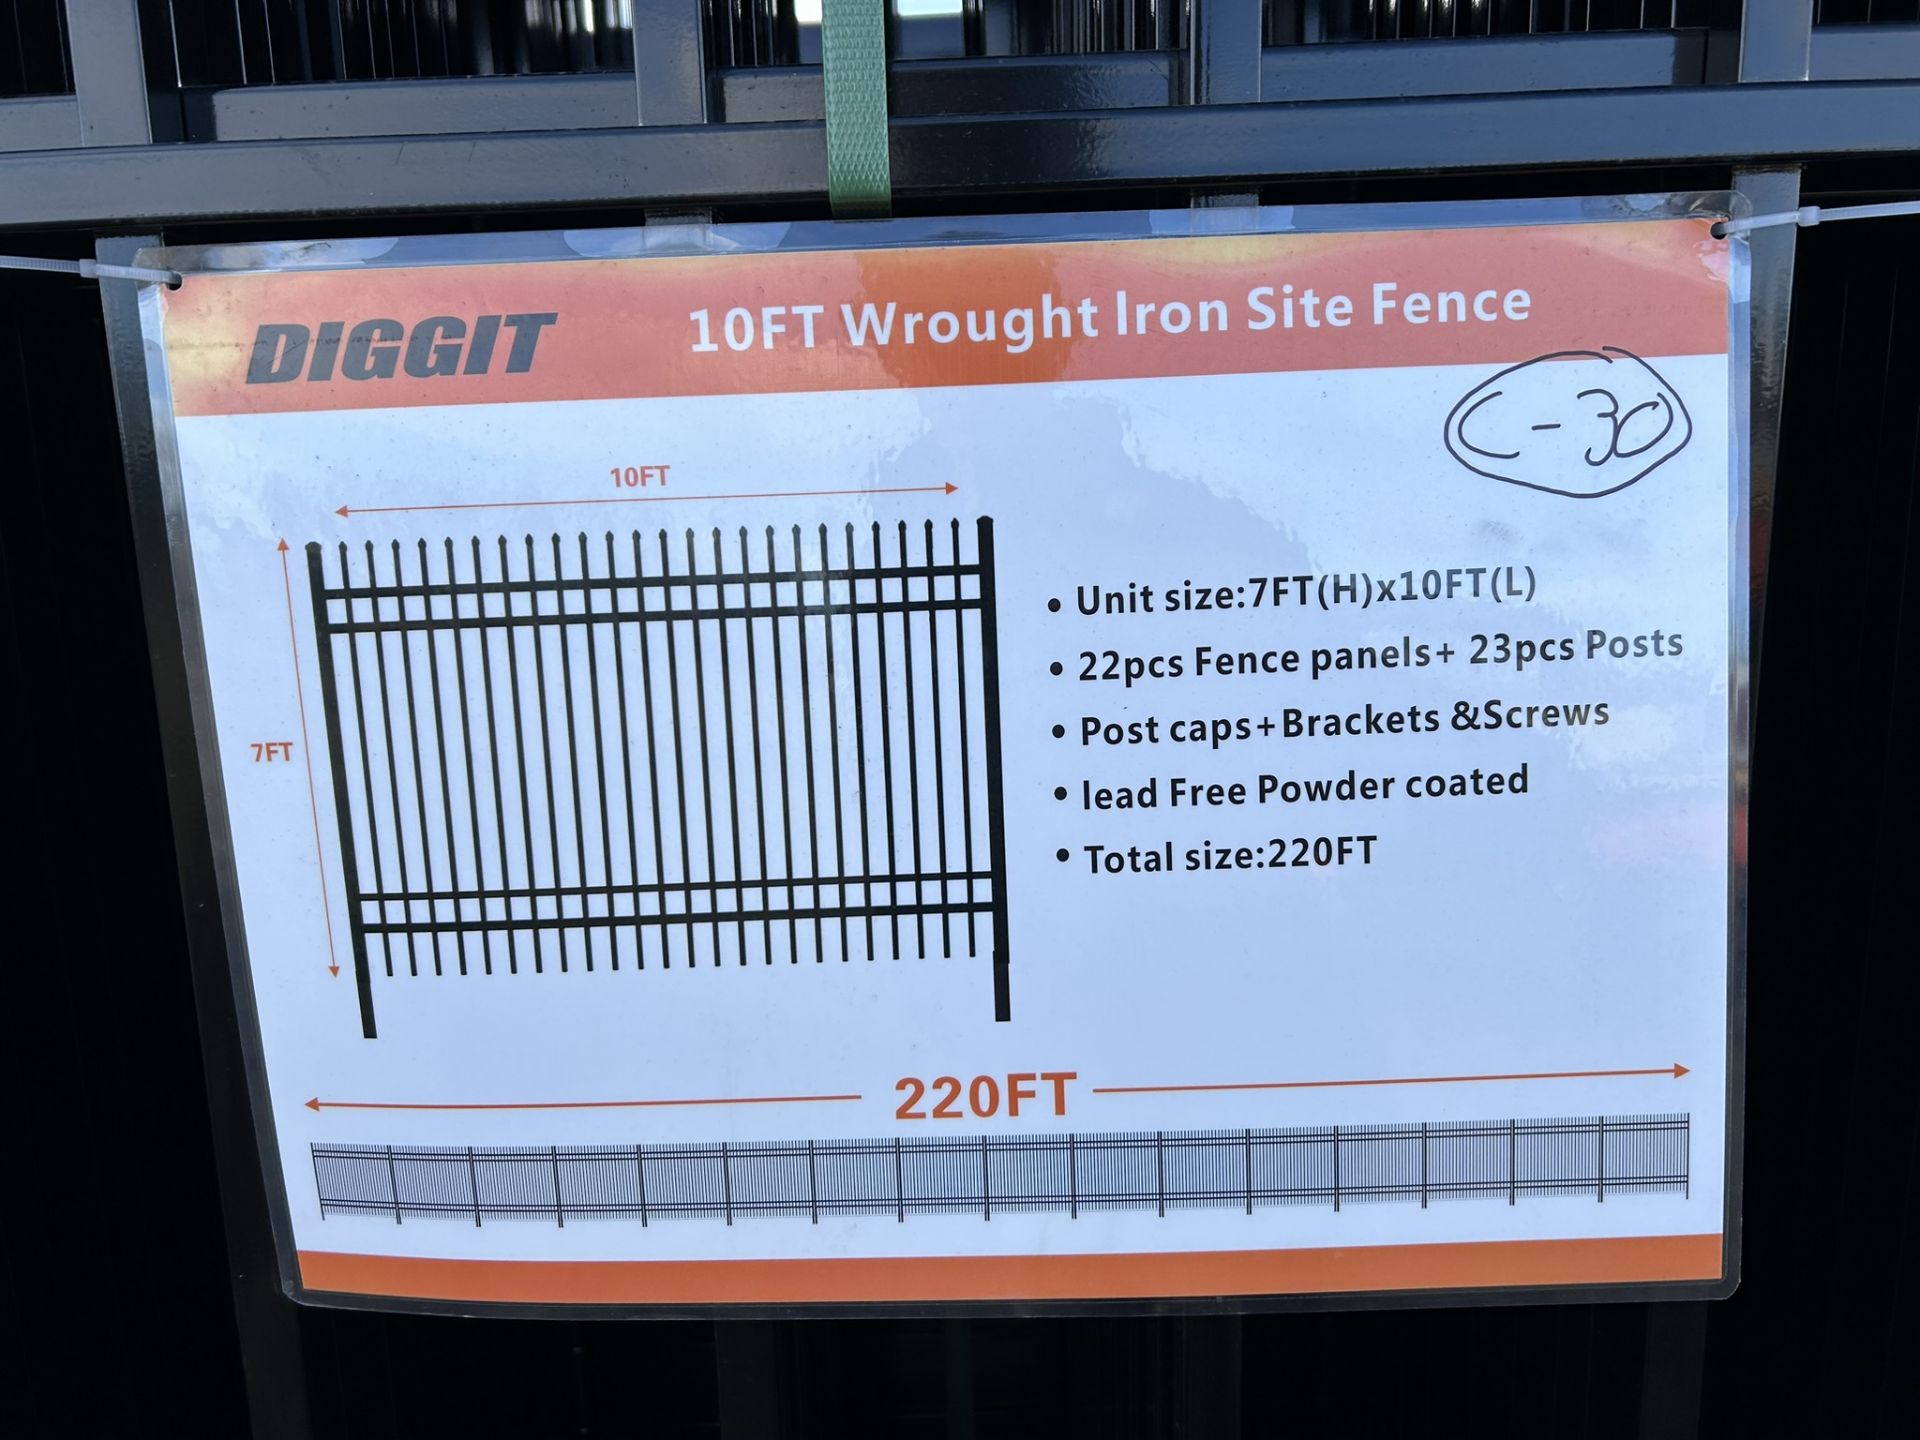 DIGGIT 10 FT ROD IRON SITE SITE FENCES - 22 PANELS 7 FT HIGH - Image 5 of 6